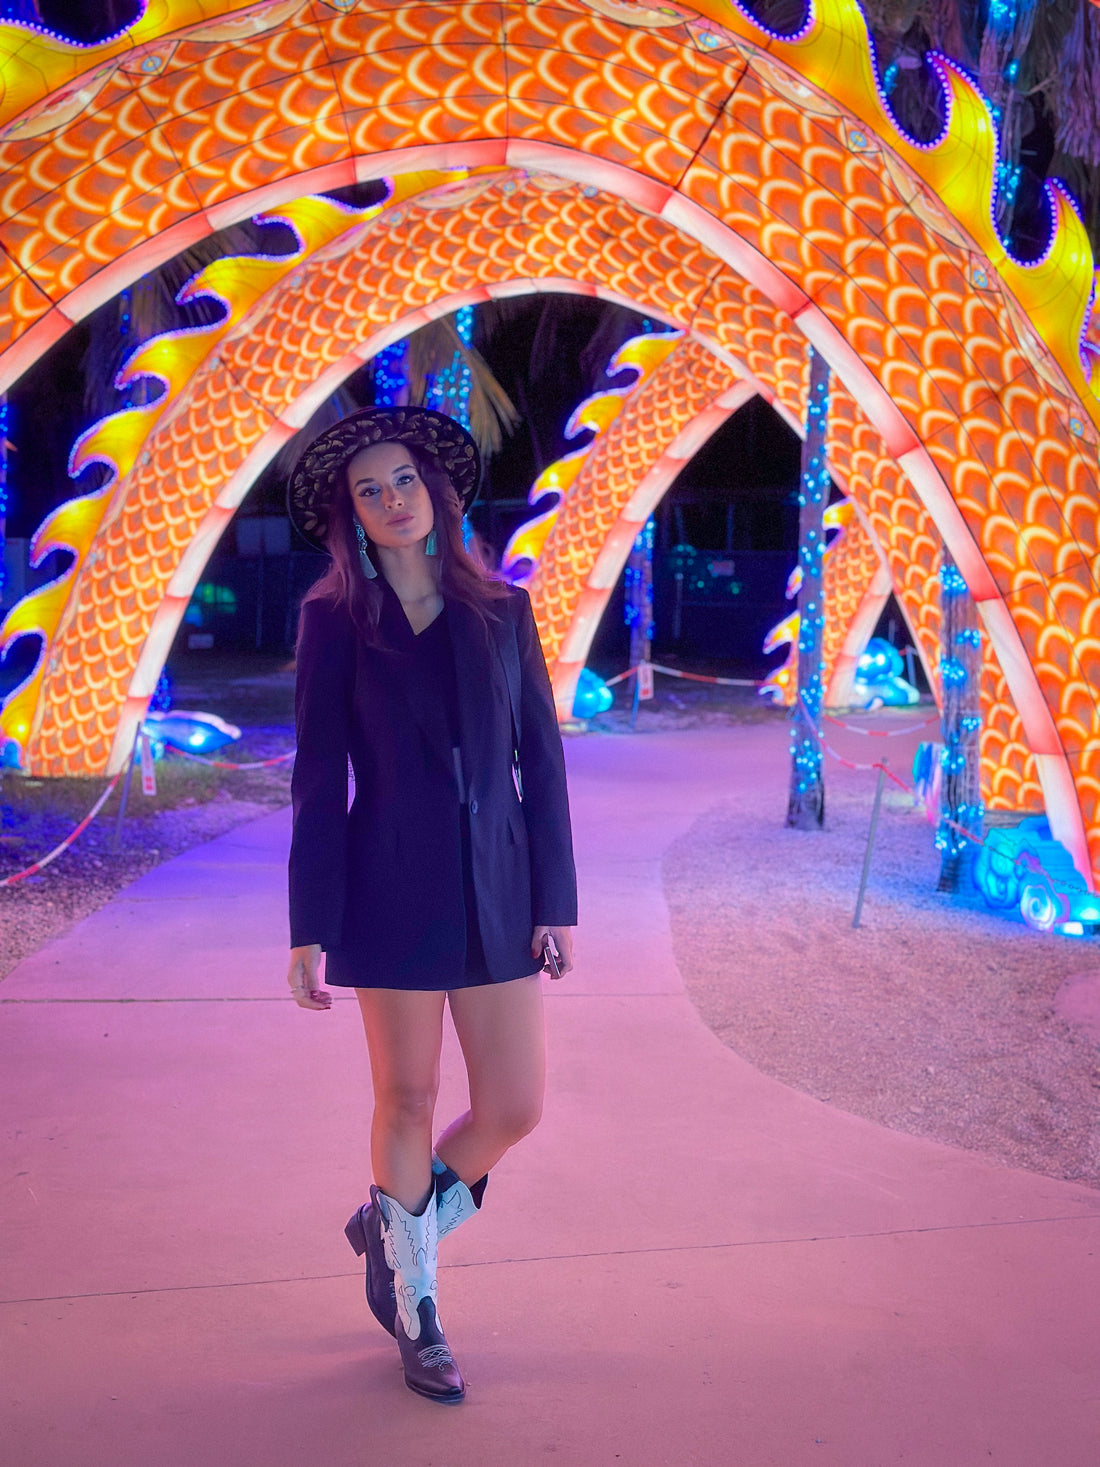 Aukala's Journey to 'Luminosa: A Festival of Light' - A Magical Night in Miami